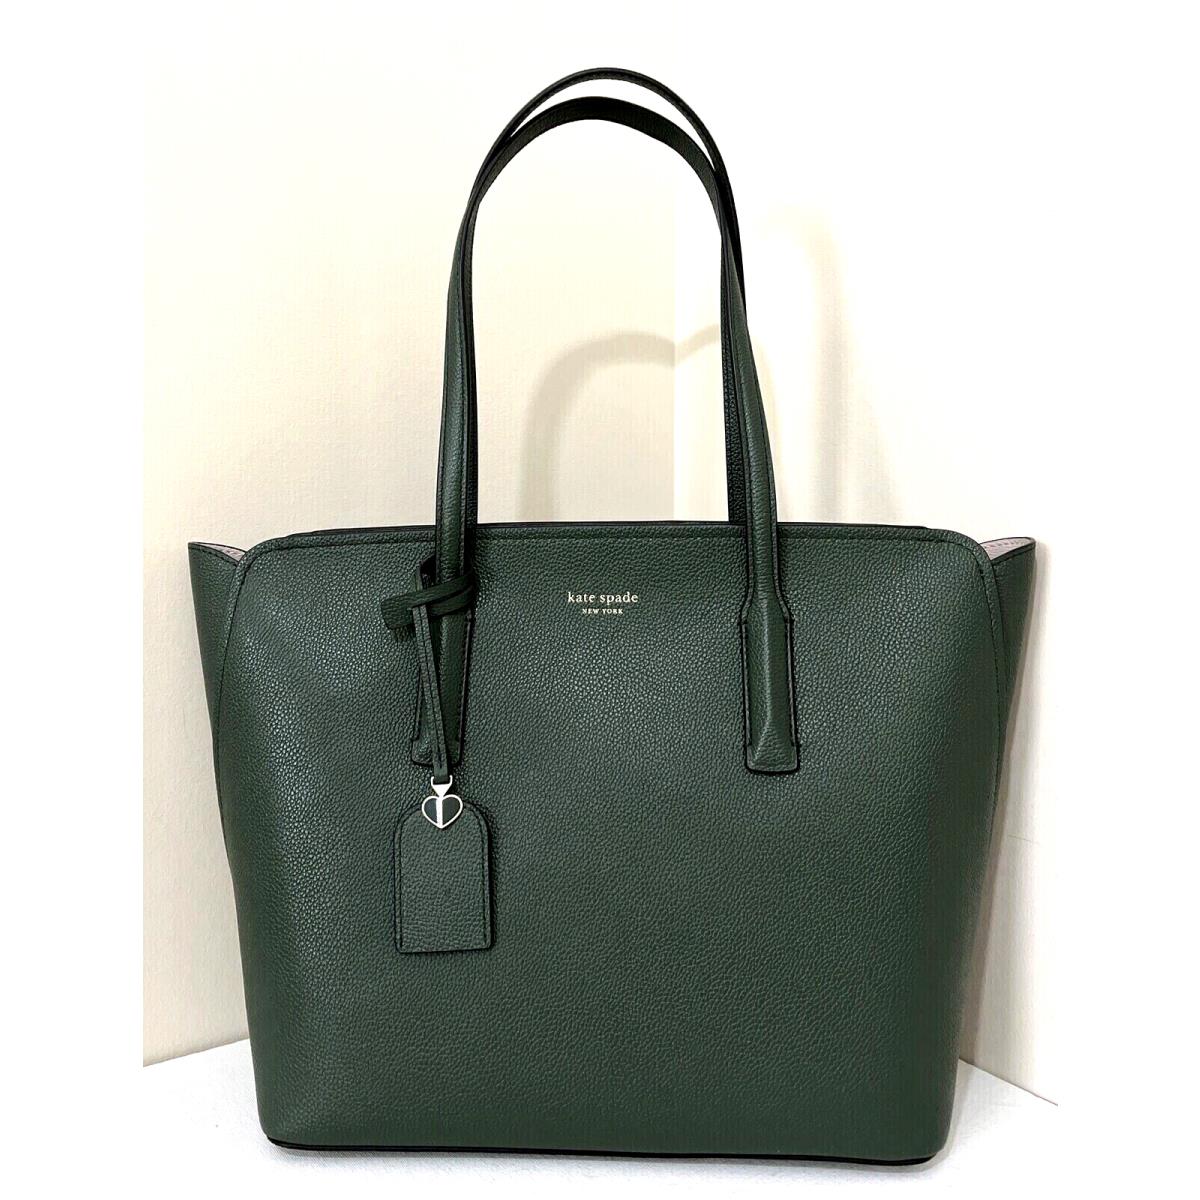 New Kate Spade Margaux Medium Tote Refined Grain Leather Pine Grove / Dust Bag